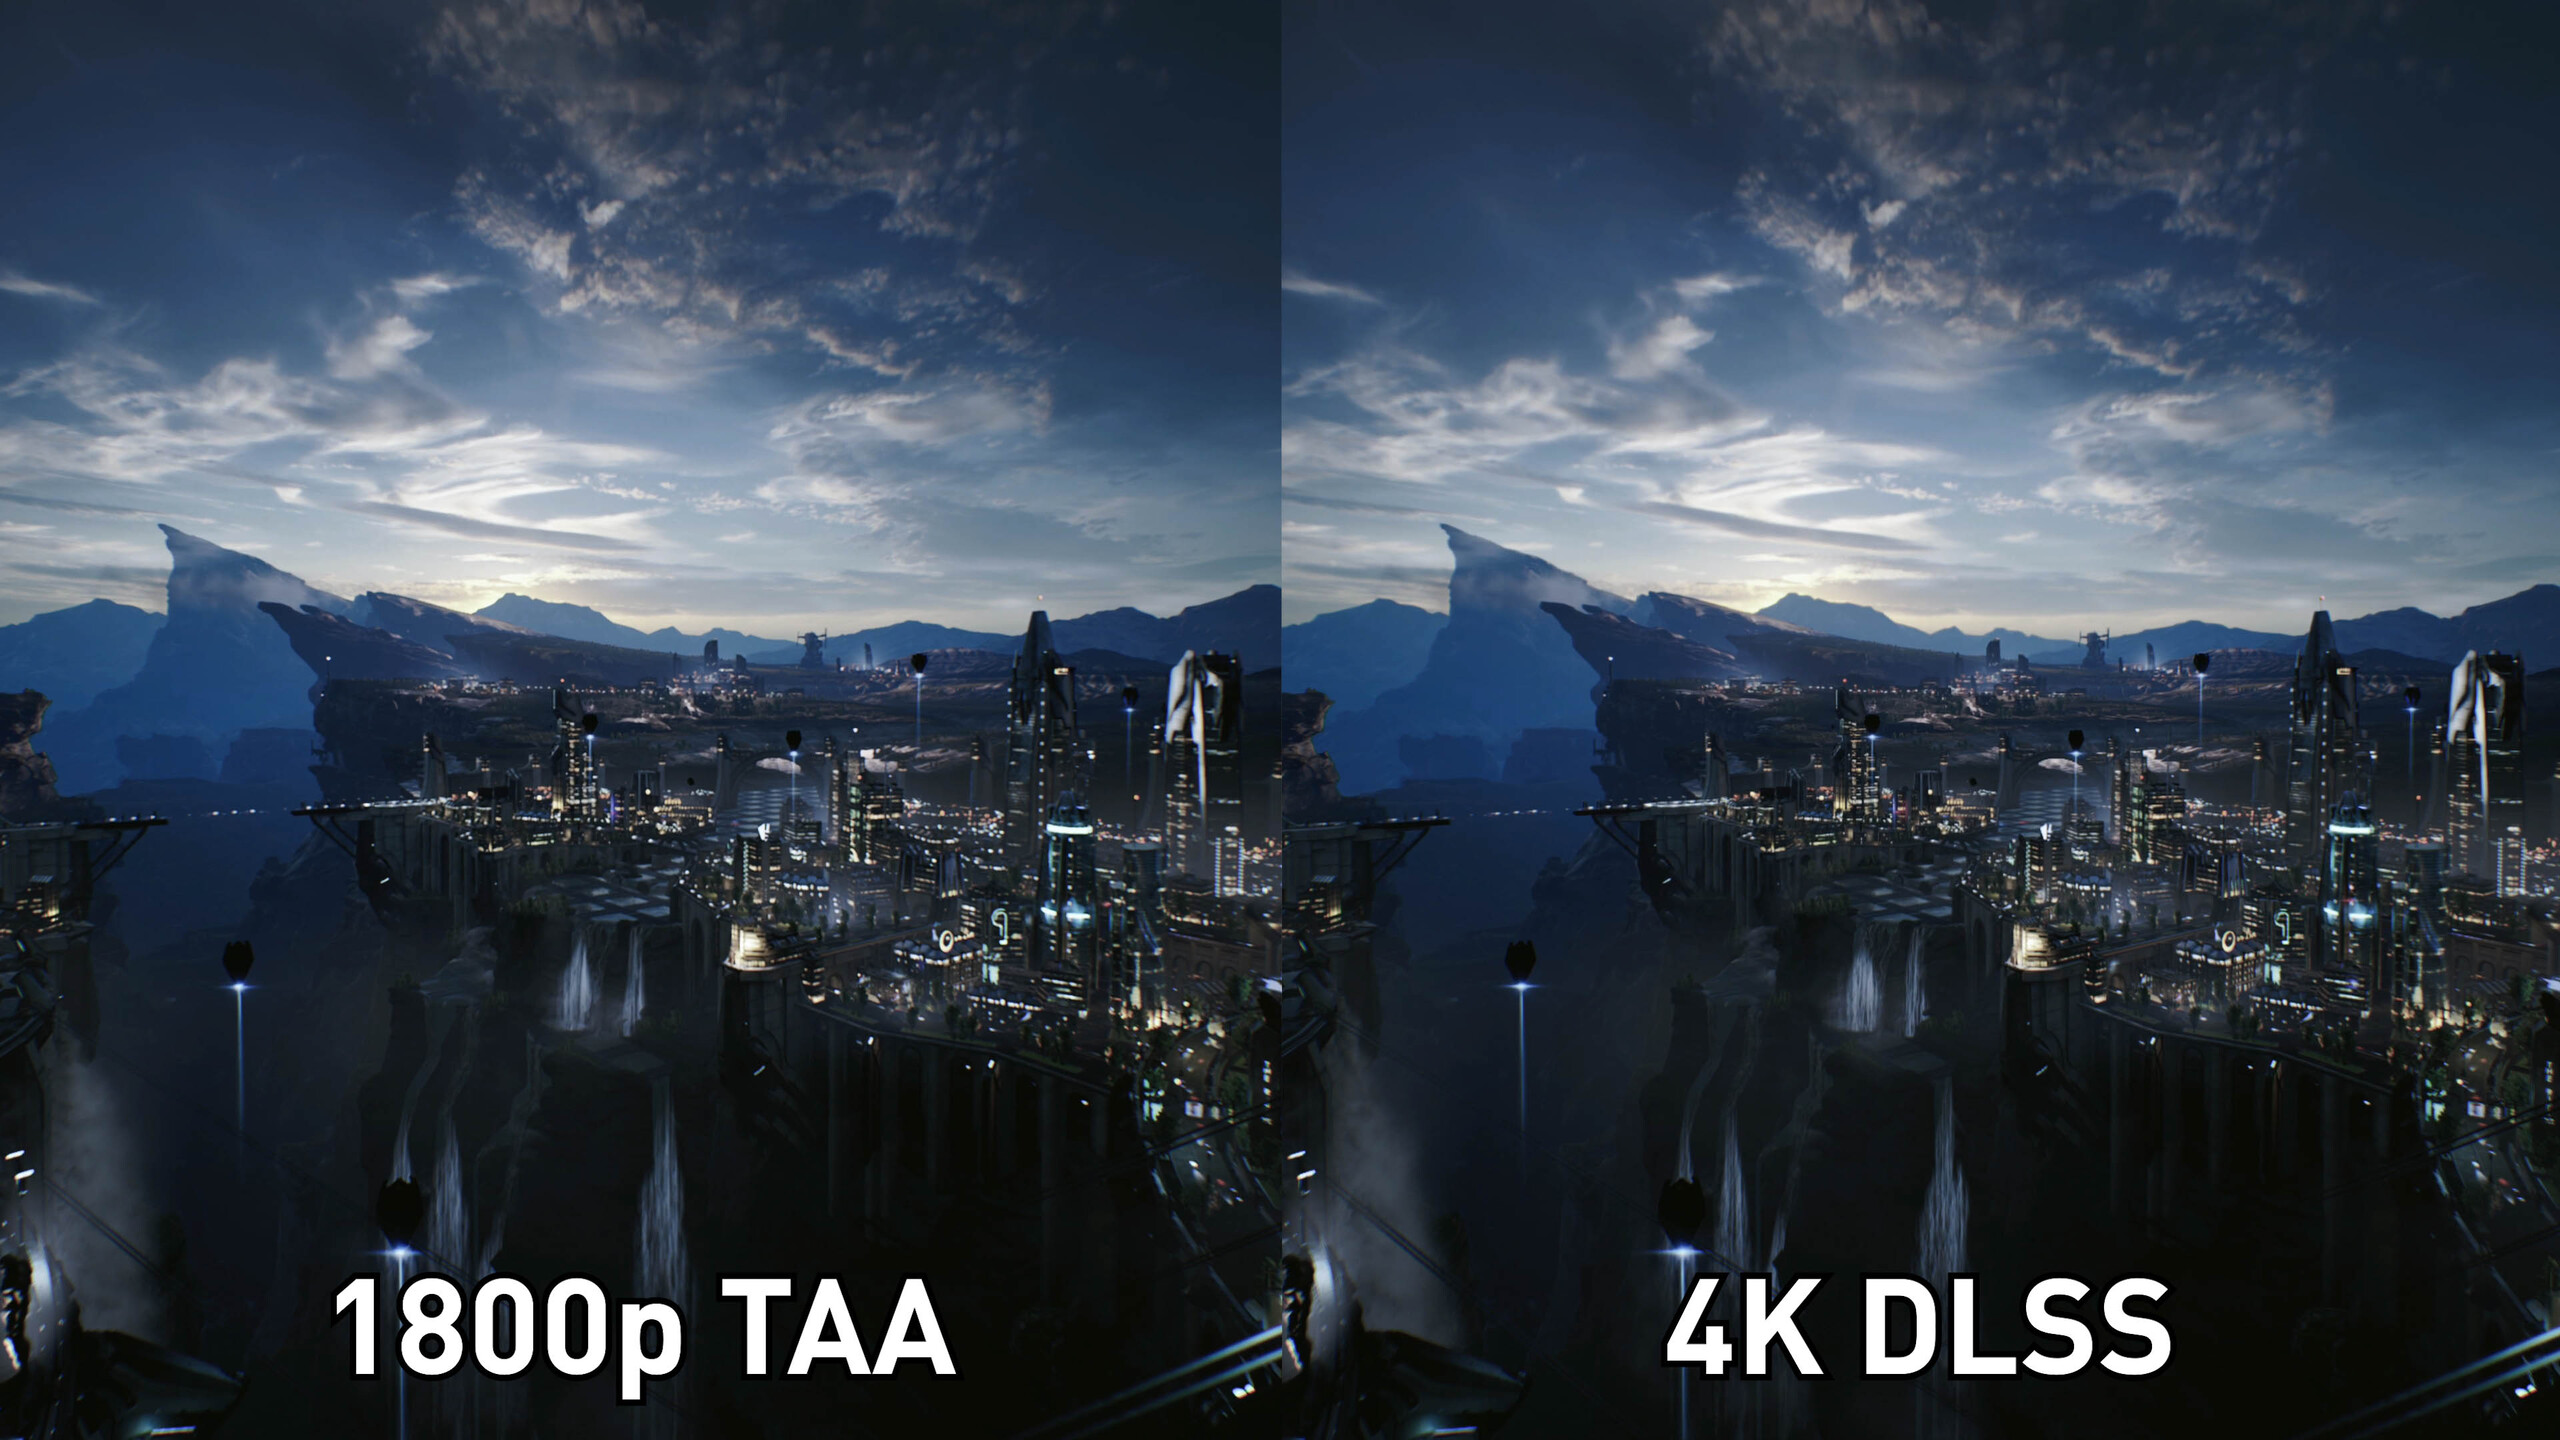 Nvidia S Dlss Technology Makes 1440p Look Like 1800p Says Pc Hardware Reviewer Notebookcheck Net News